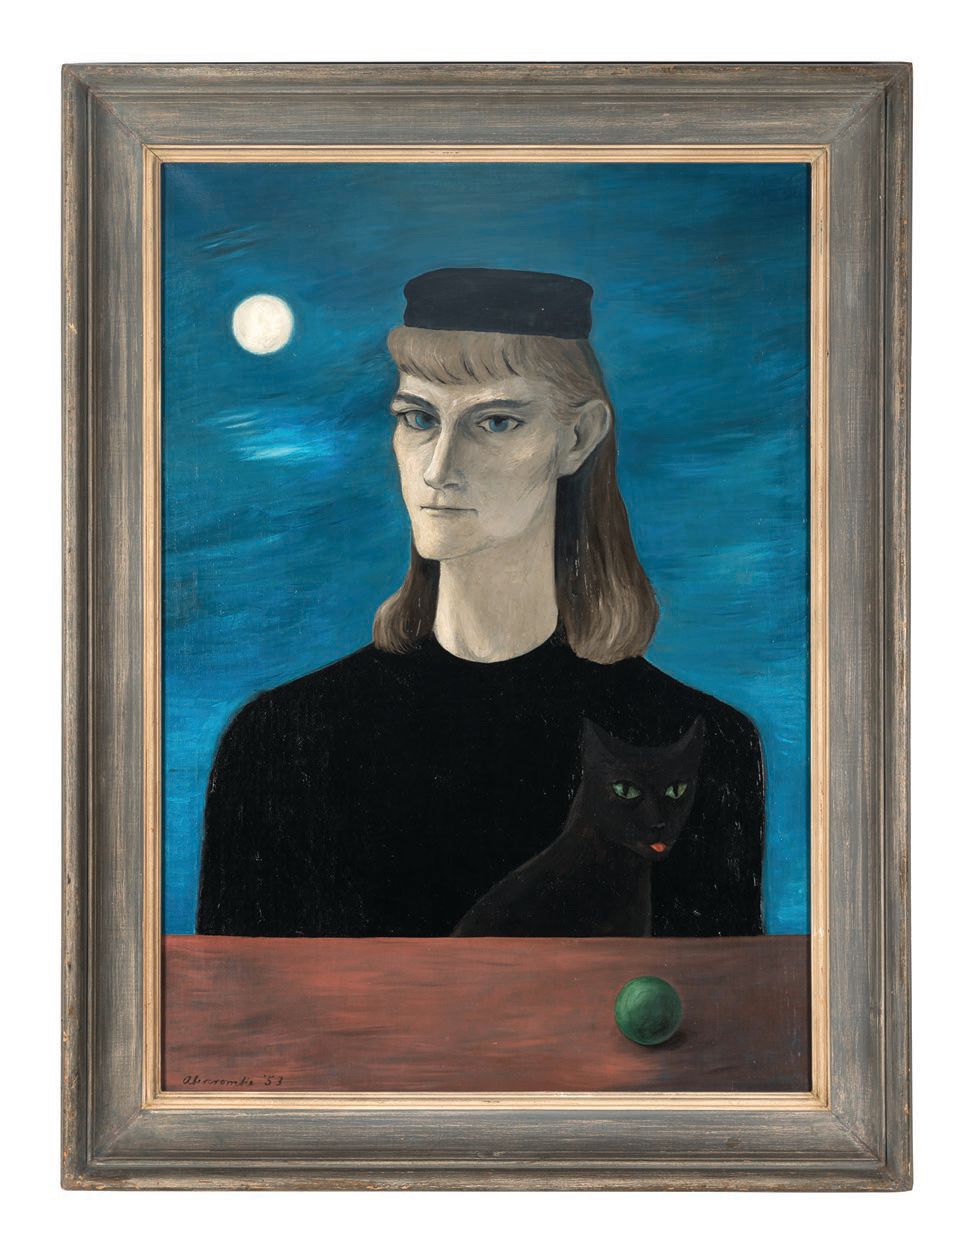 Gertrude Abercrombie, “Self and Cat (Possims)” (1953, oil on canvas), signed and dated by Abercrombie, 34 inches by 24 inches PHOTO COURTESY OF HINDMAN